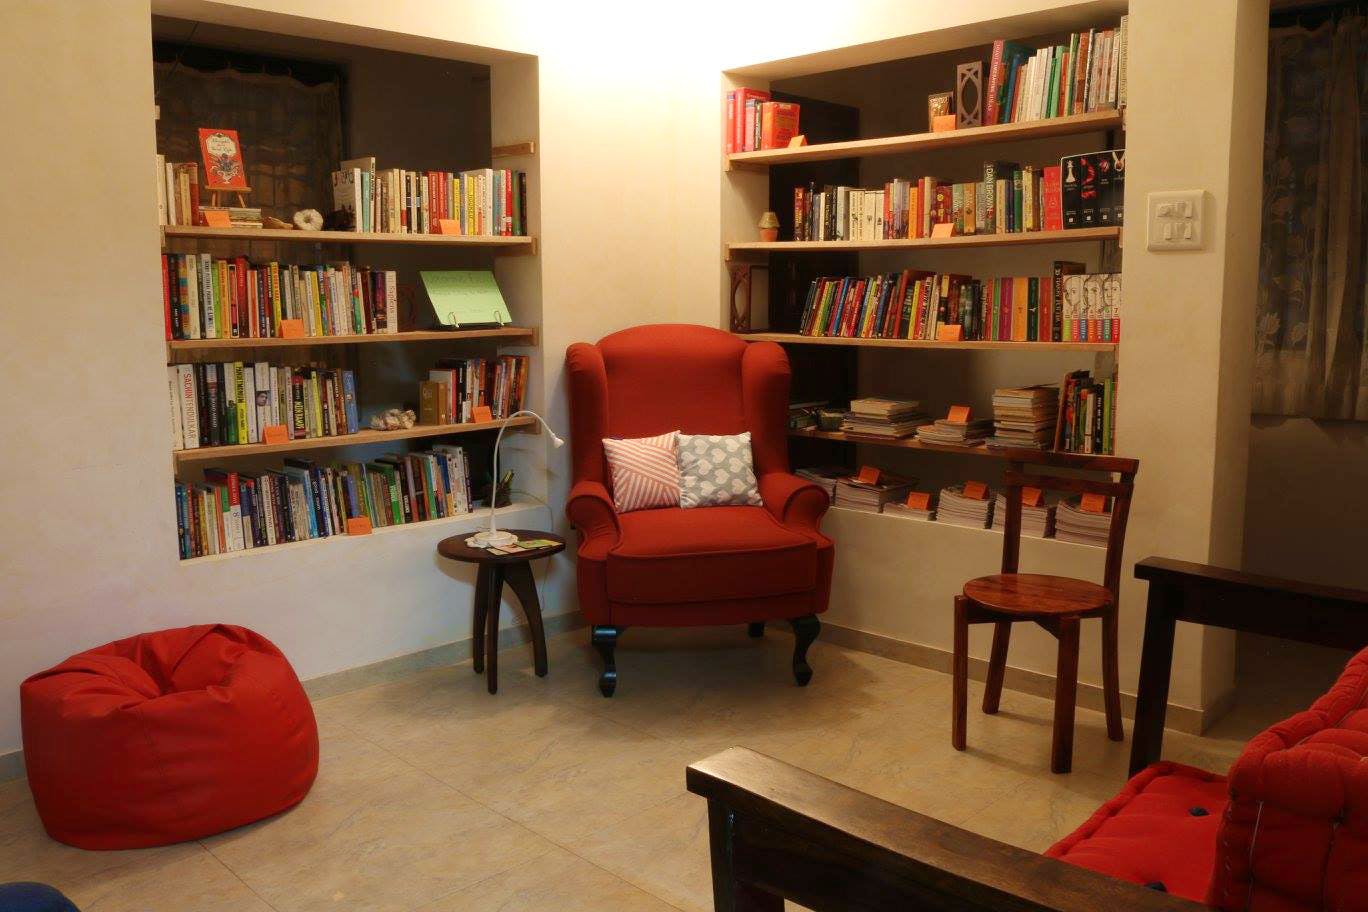 Bookcase,Shelving,Furniture,Shelf,Room,Library,Building,Living room,Interior design,Couch